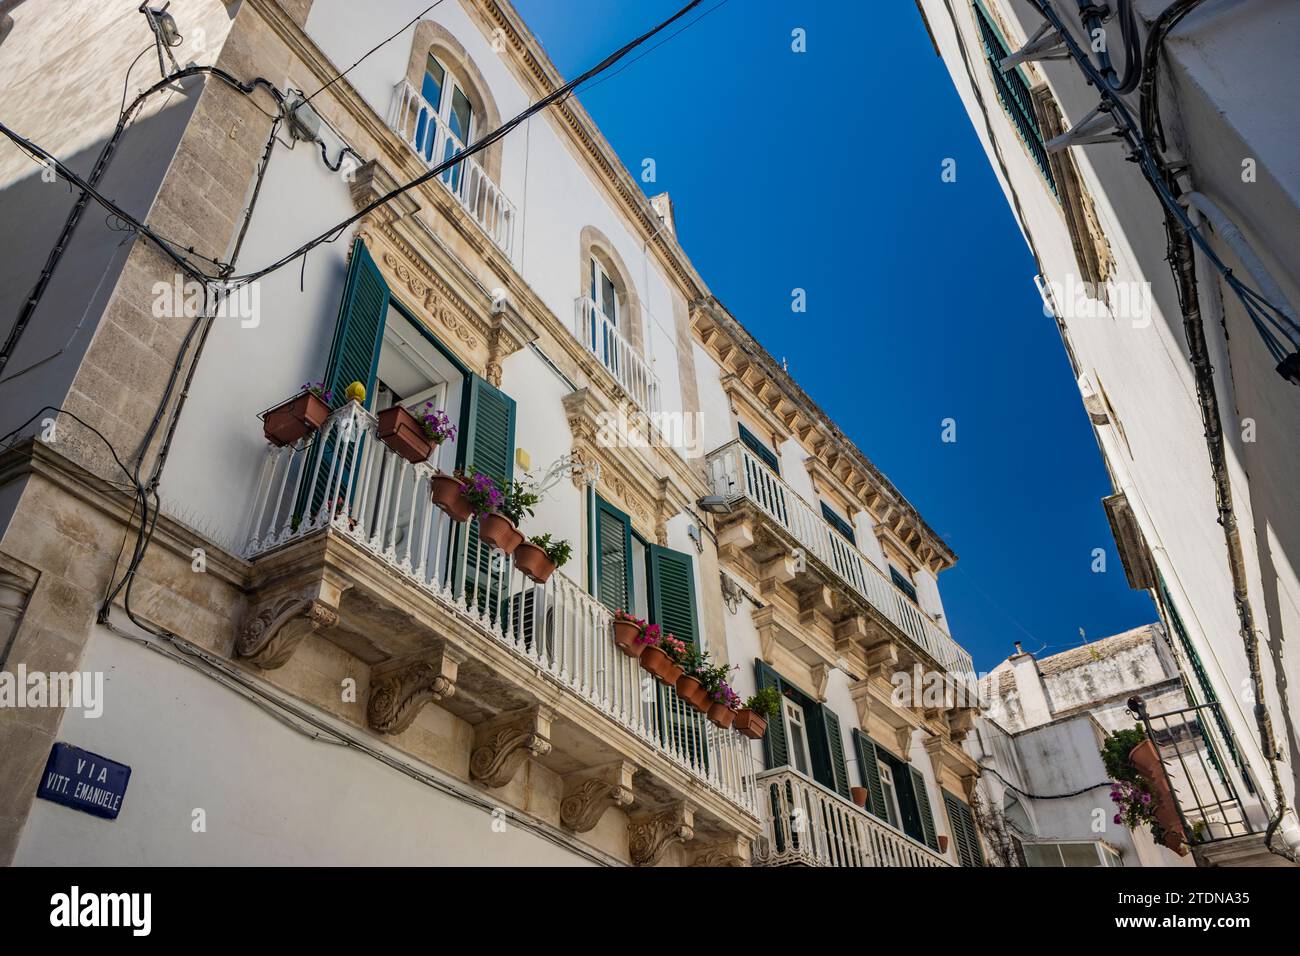 Martina Franca, Taranto, Puglia, Italy. Village with baroque architecture. The narrow alleys of the city and the buildings with their characteristic b Stock Photo